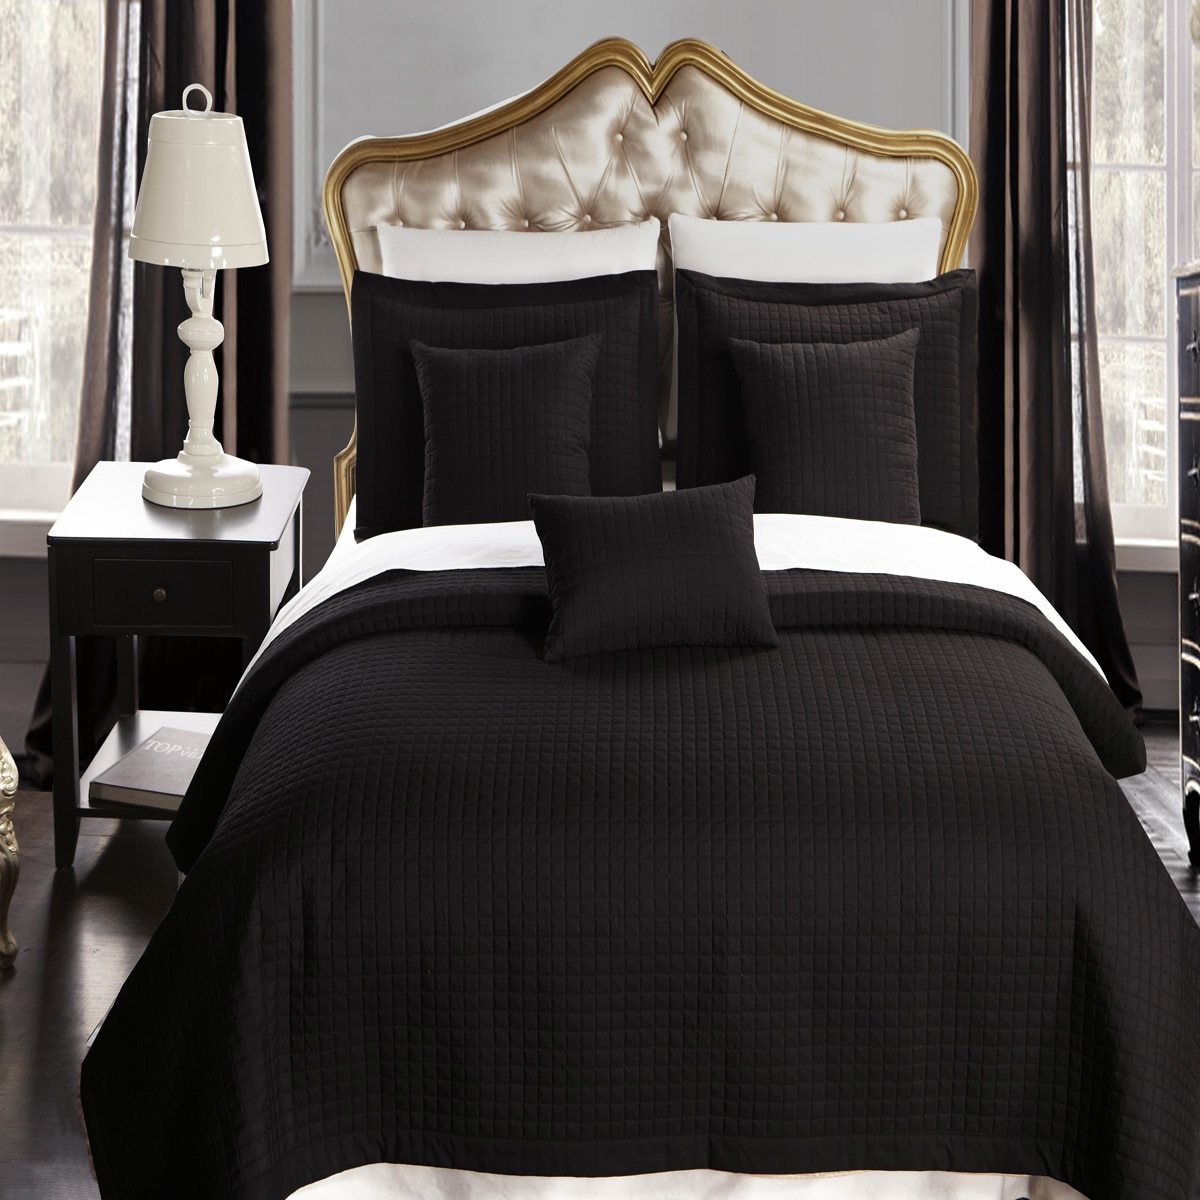 Luxury Checkered Quilted Wrinkle-Free Quilted Coverlet Set: Black - $111.98 - $149.98